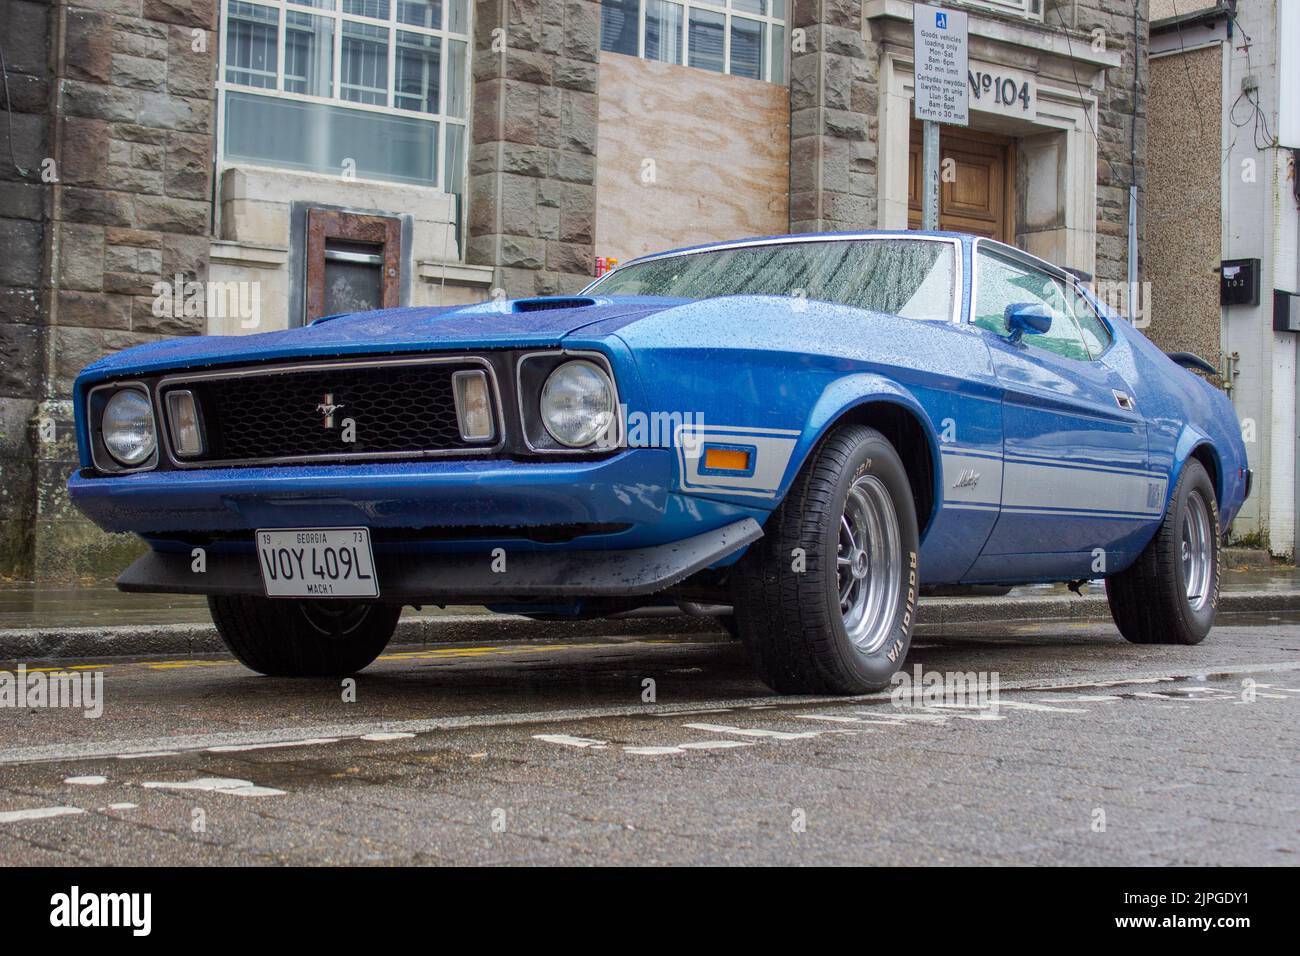 A Ford Mustang Mach 1 classic muscle car on a rainy day. Stock Photo